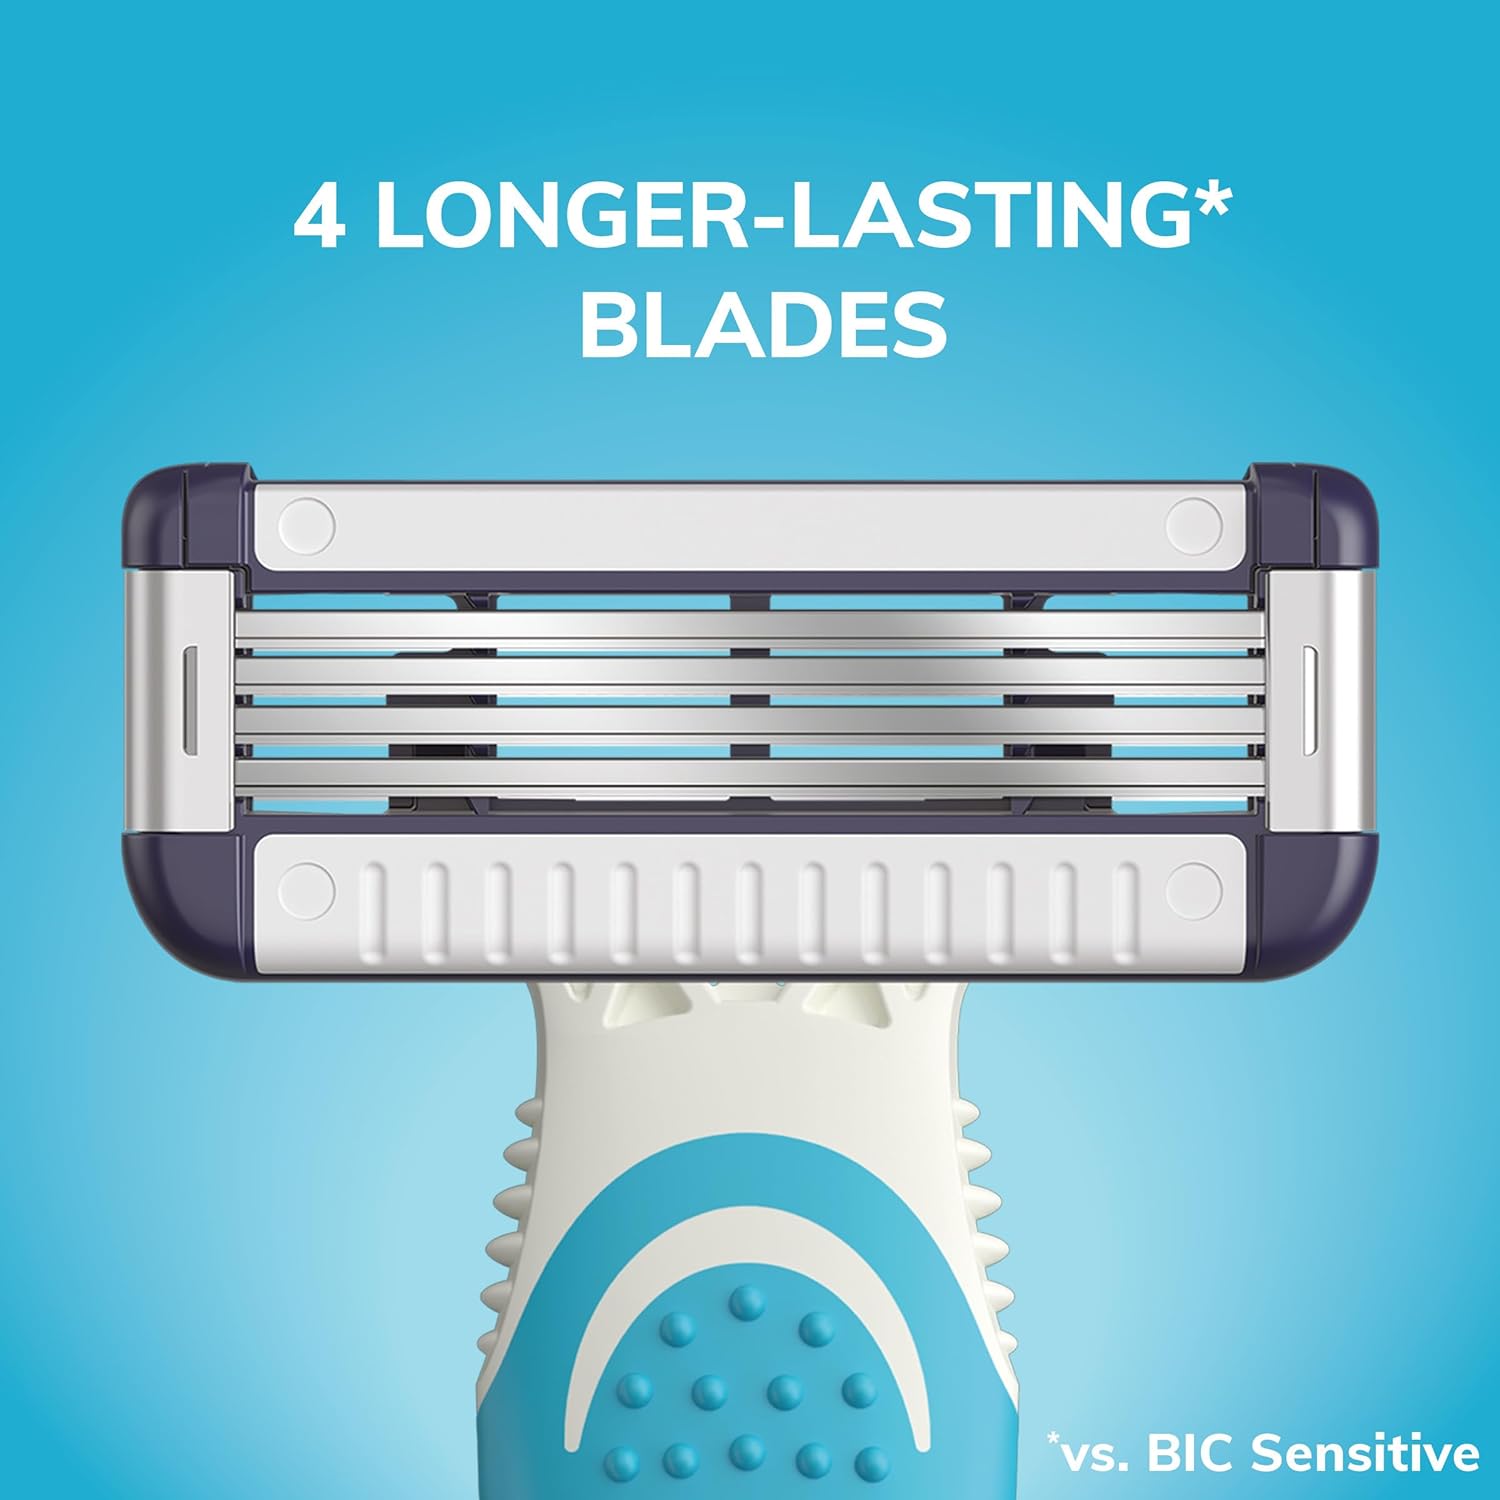 BIC EasyRinse Sensitive Anti-Clogging Men's Disposable Razors, Clinically Proven for Sensitive Skin, Shaving Razors With 4 Blades, 2 Count : Beauty & Personal Care